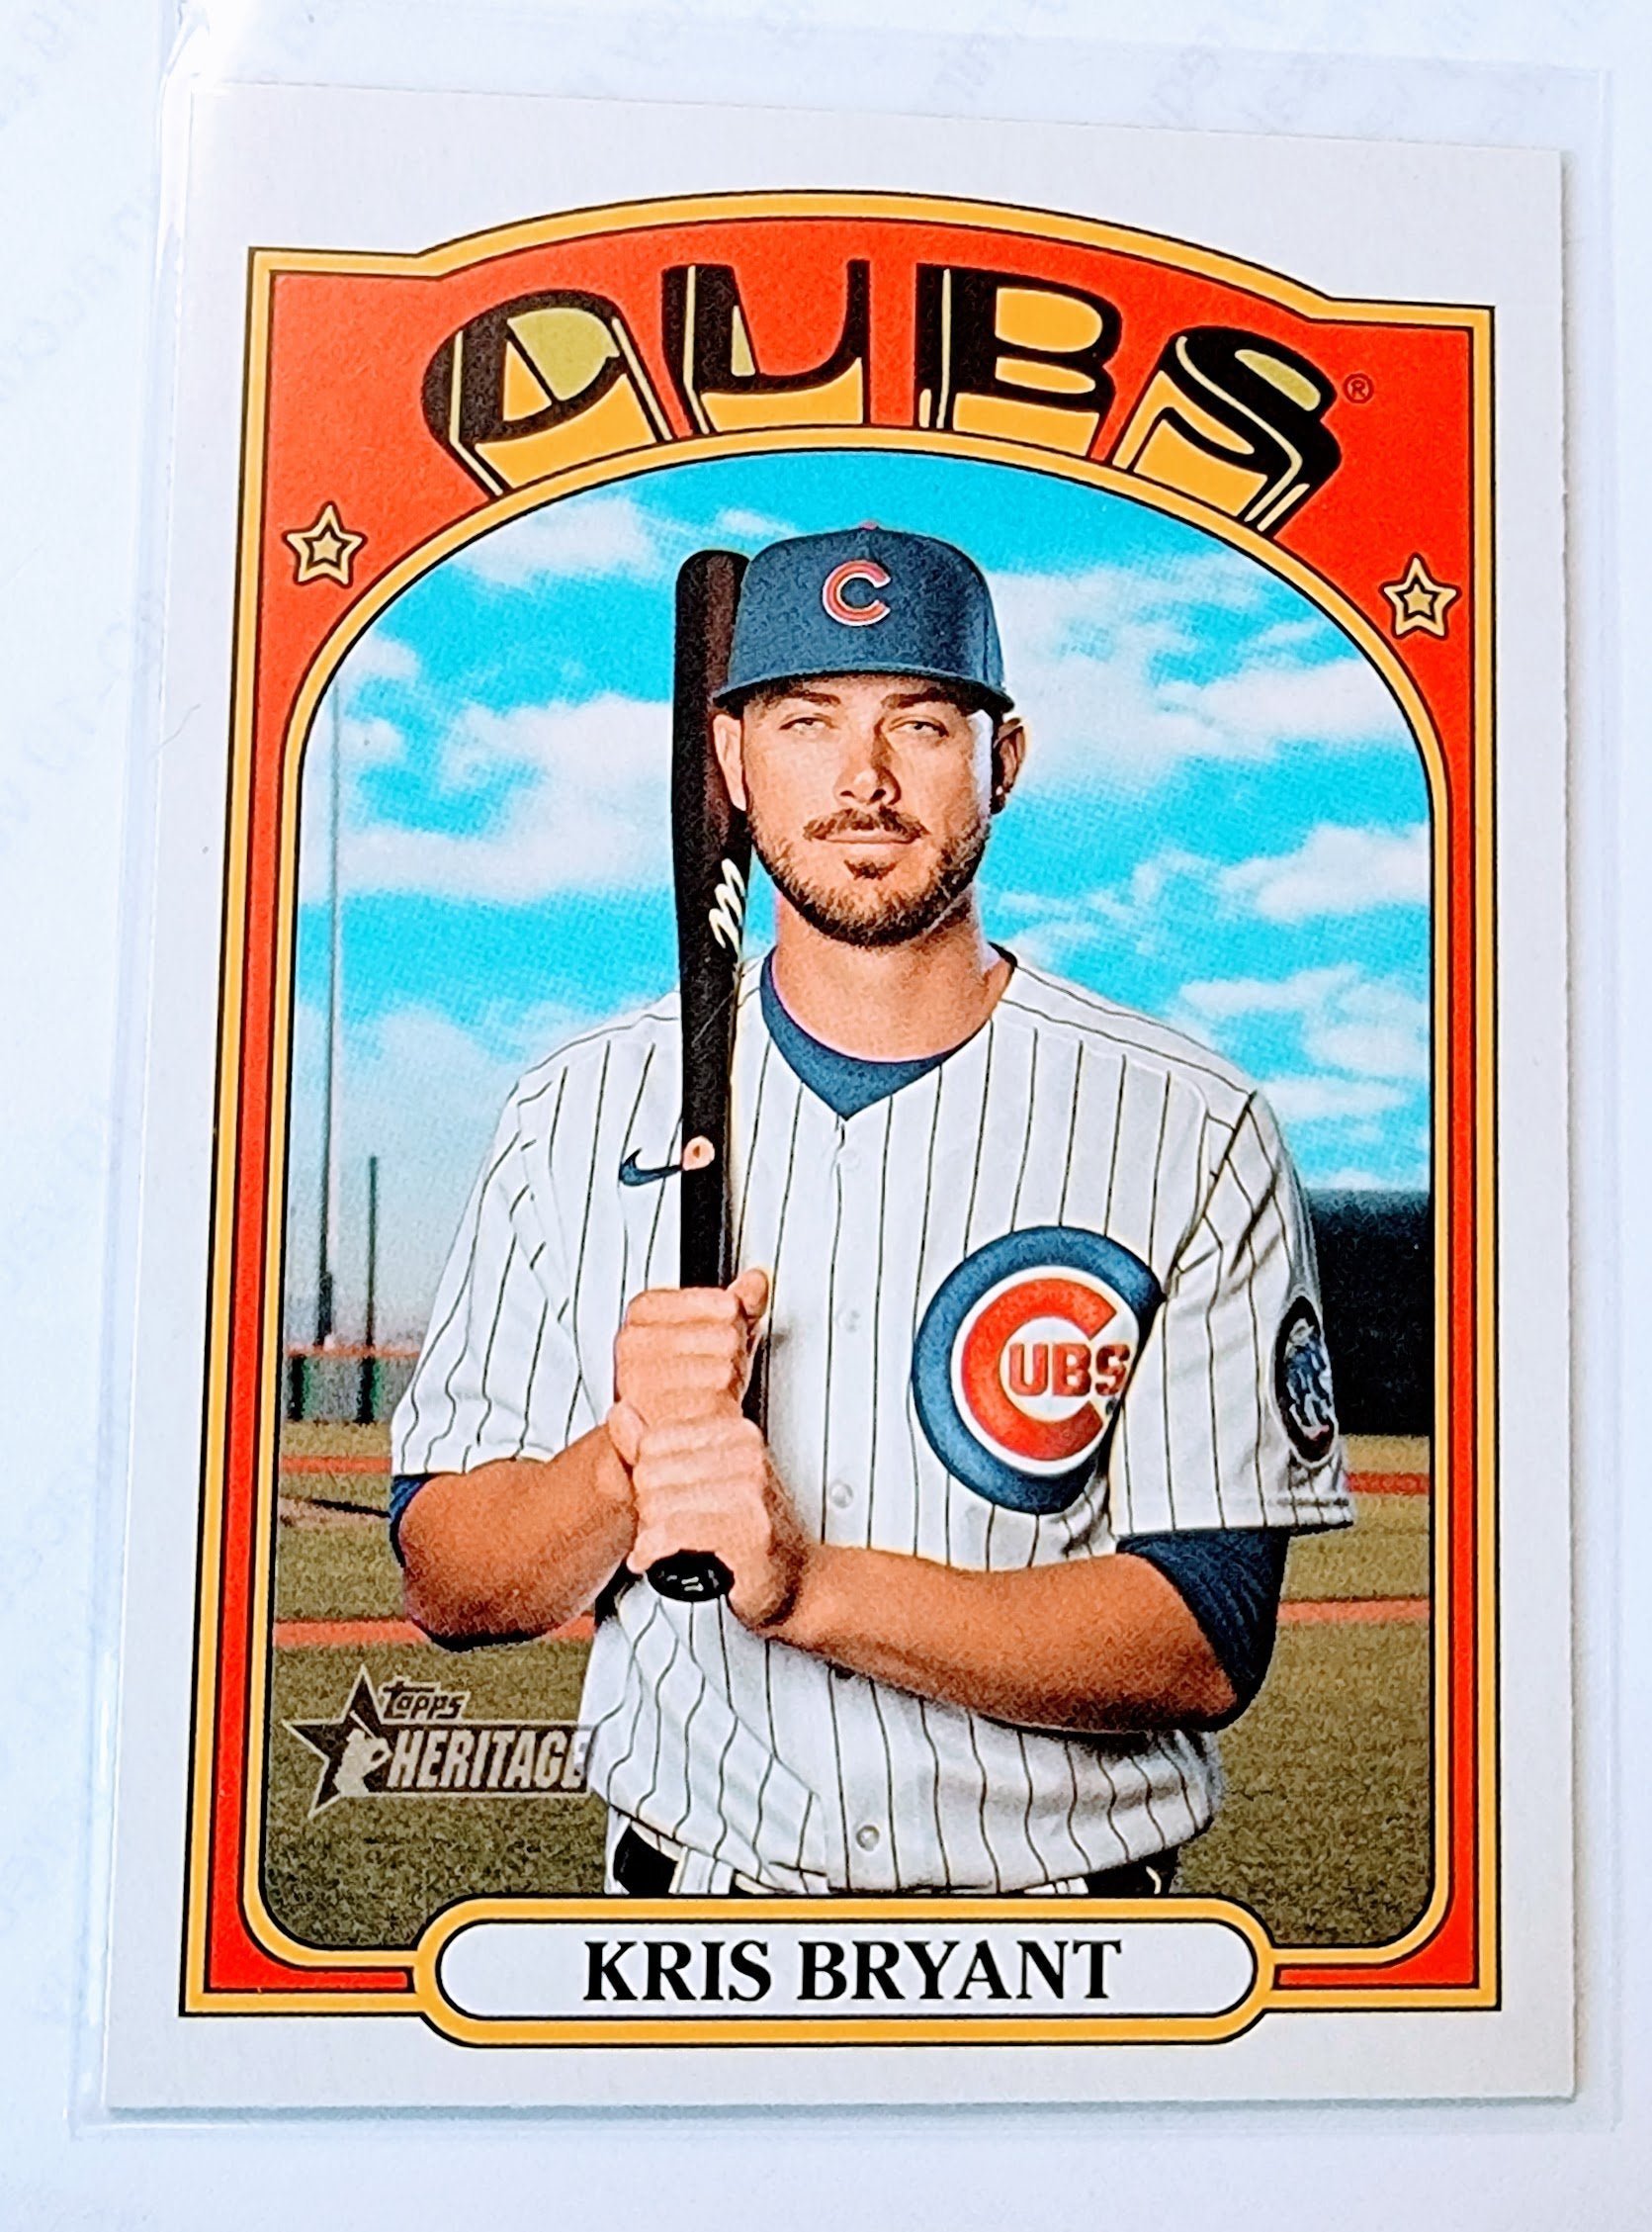 2021 Topps Heritage Kris Bryant Baseball Trading Card MCSC1 simple Xclusive Collectibles   